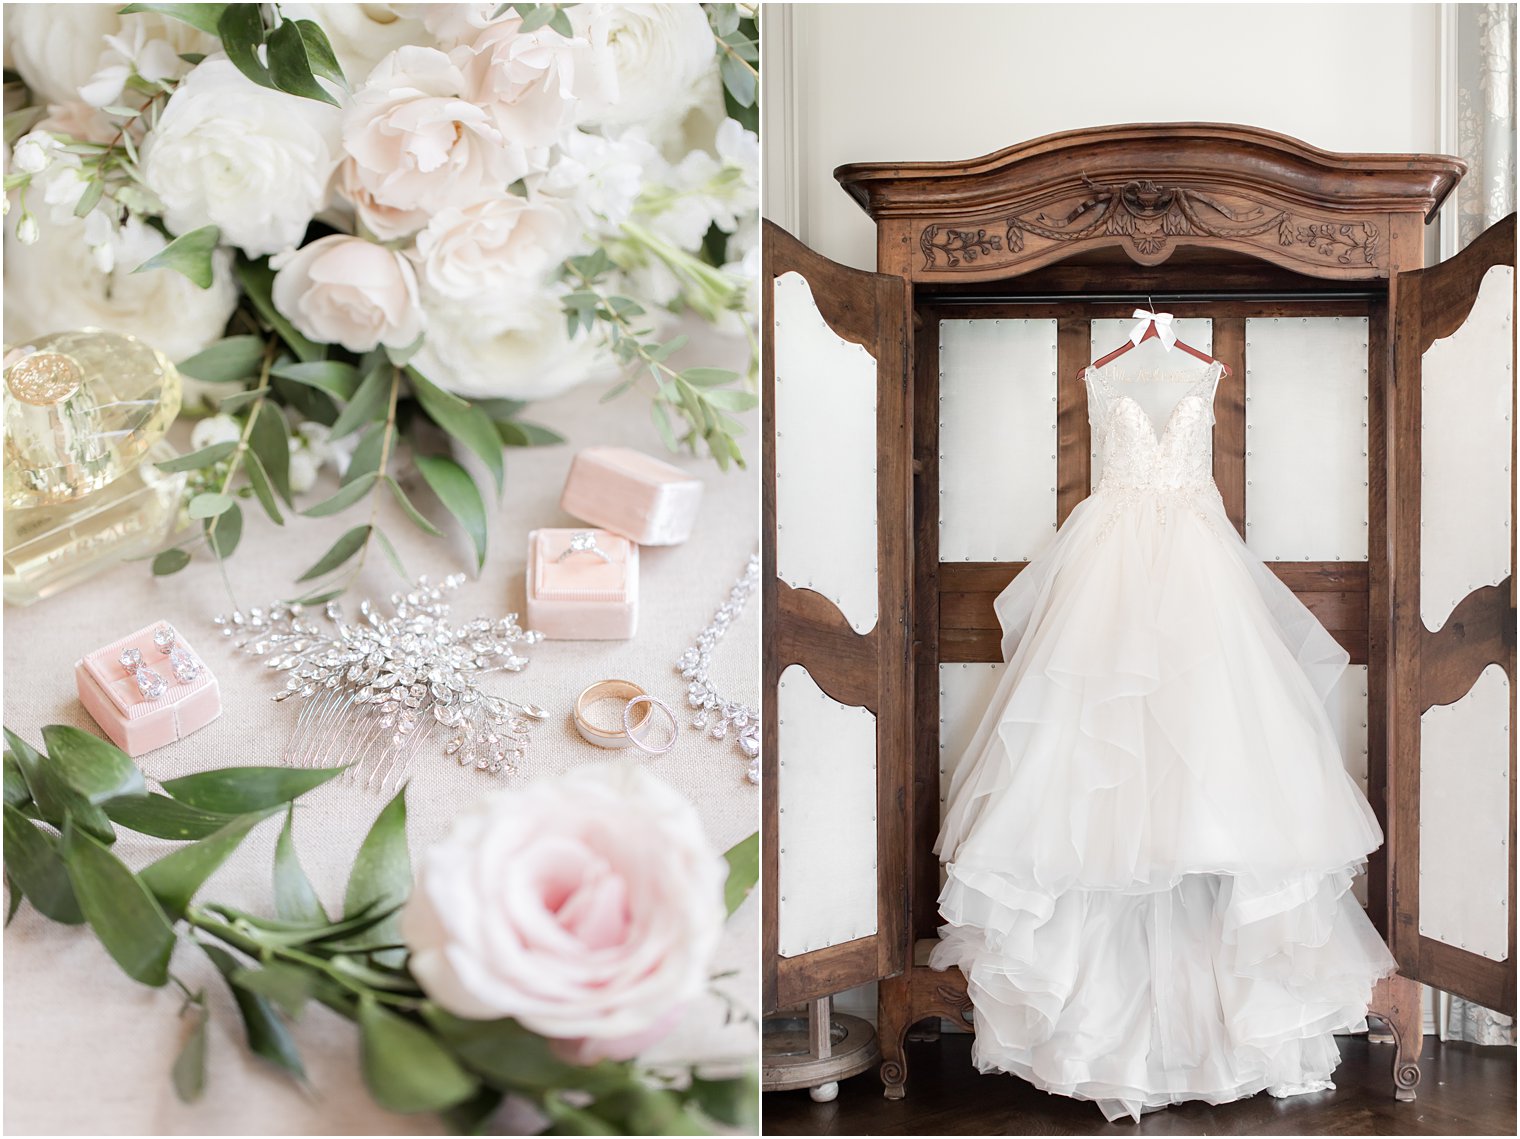 Wedding jewelry and dress at Park Chateau Estate bridal suite